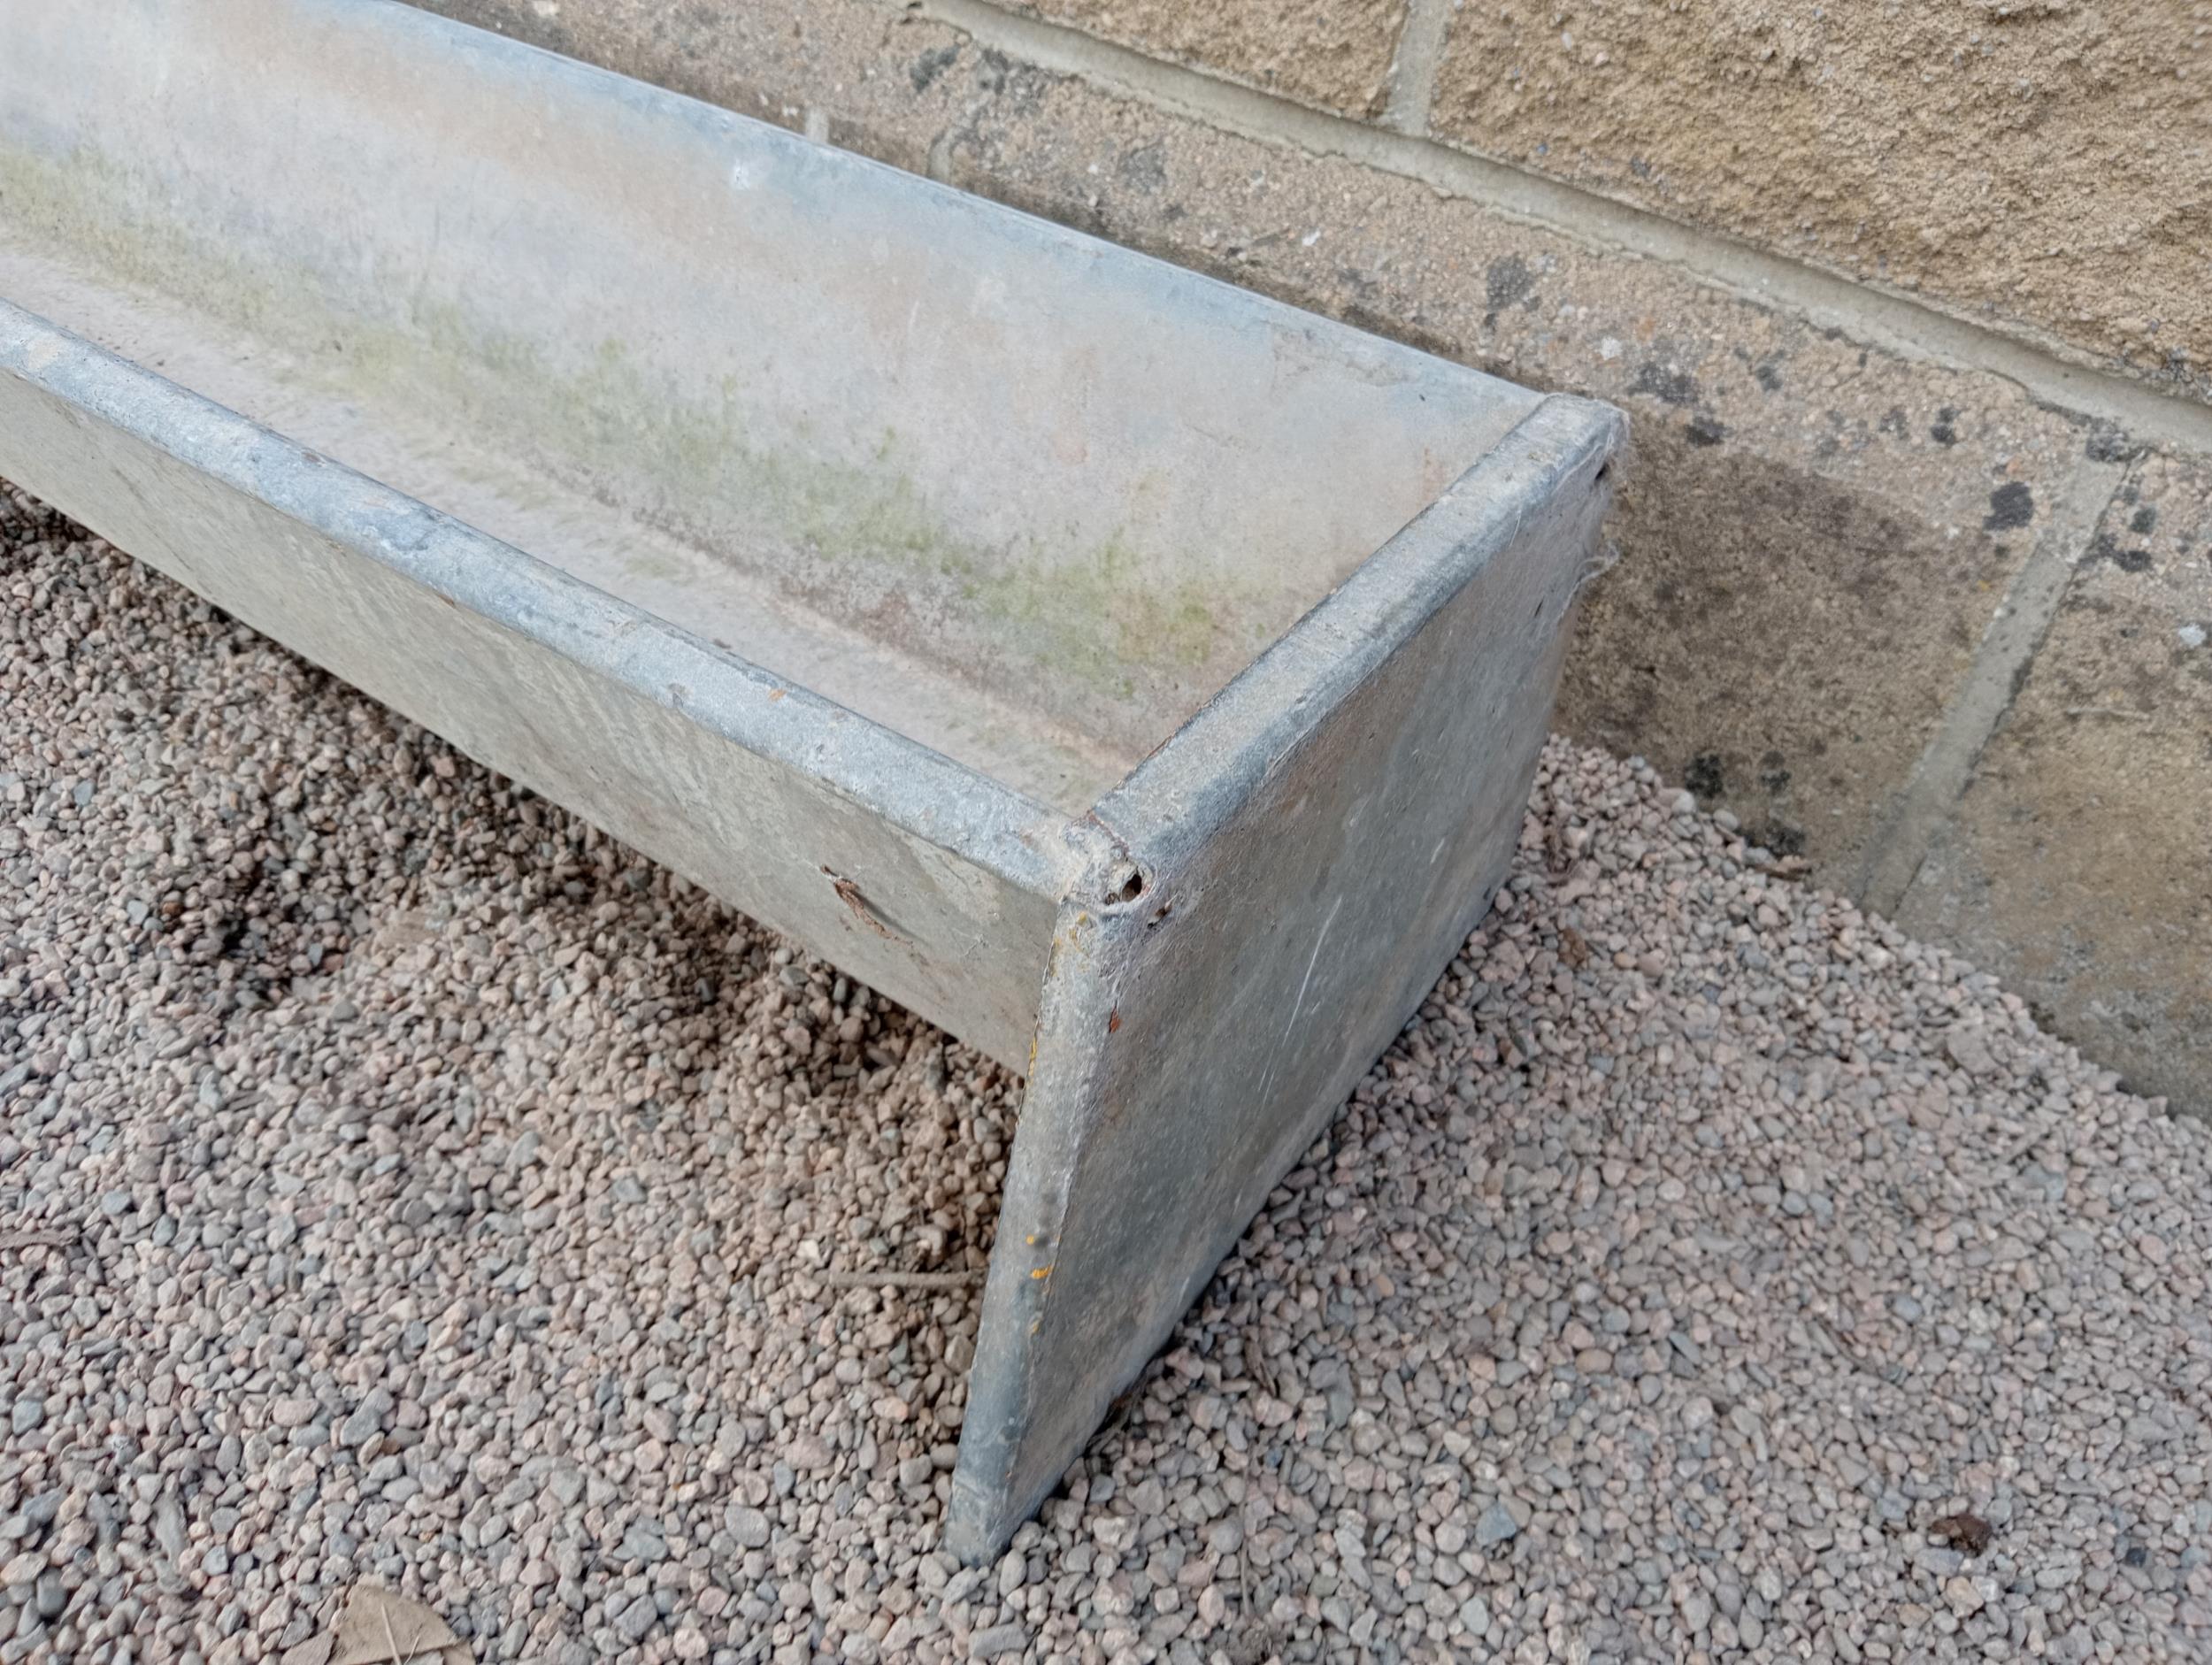 Galvanised trough feeder {H 20cm x W 276cm x D 6cm}. (NOT AVAILABLE TO VIEW IN PERSON) - Image 4 of 4